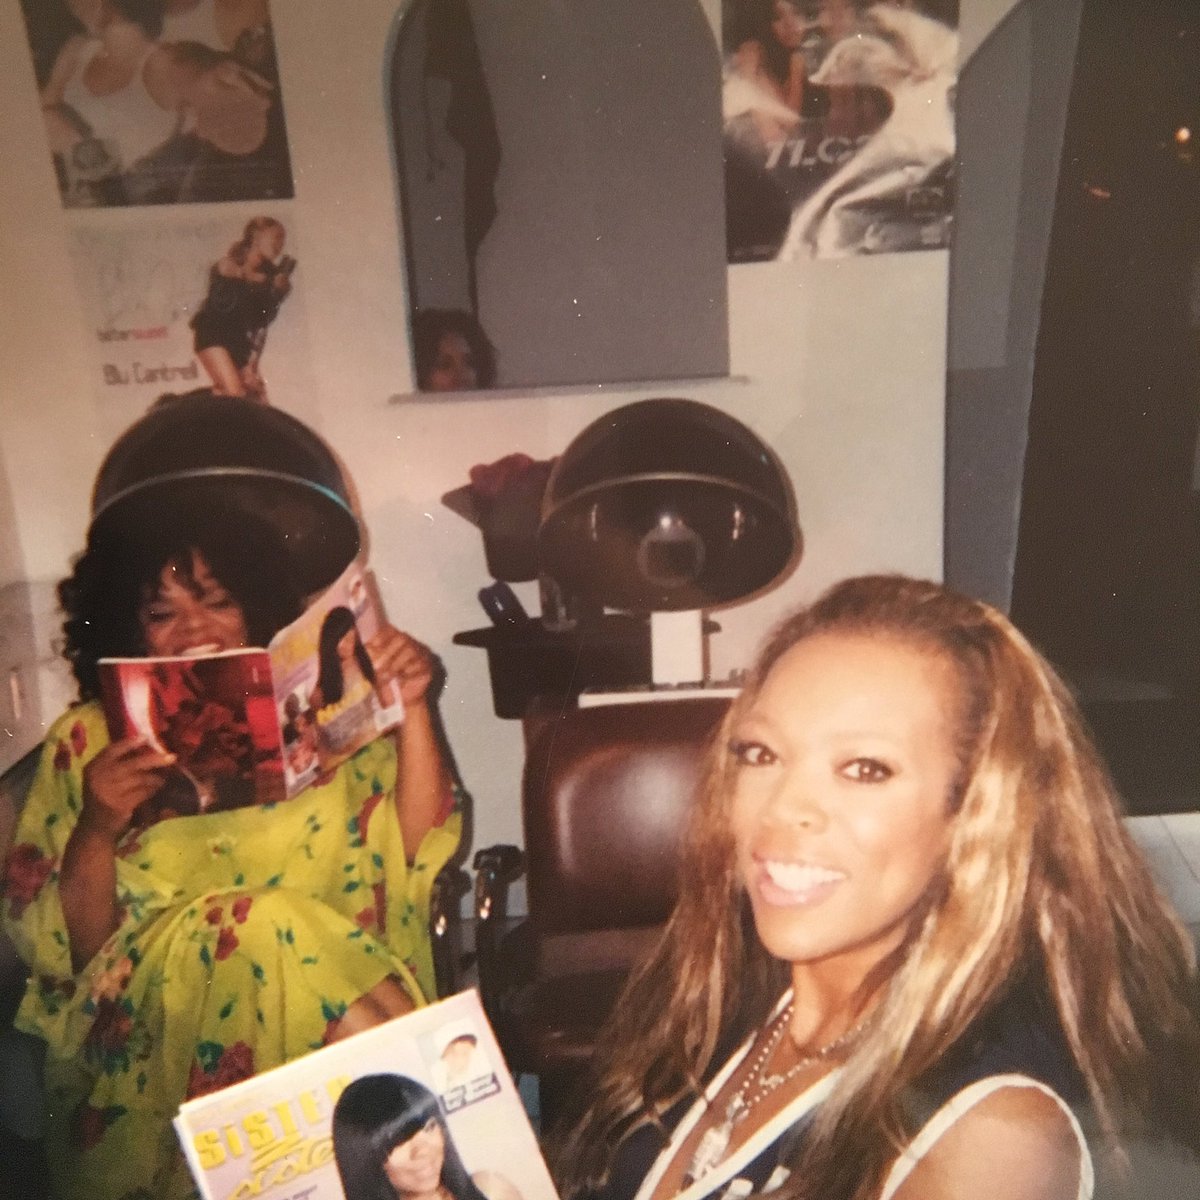 #JFBThrowBack! @WendyWilliams and @1stLadyJFB That smile! Priceless! #BlackWomenHistory #AuntieJamiesBabies #MyBabies JamieFosterBrown.com 'While everyone else is on the outside, get the inside scoop with J.F.B.! #DanteHawkinsSaidSo #nyc #Dc #philly